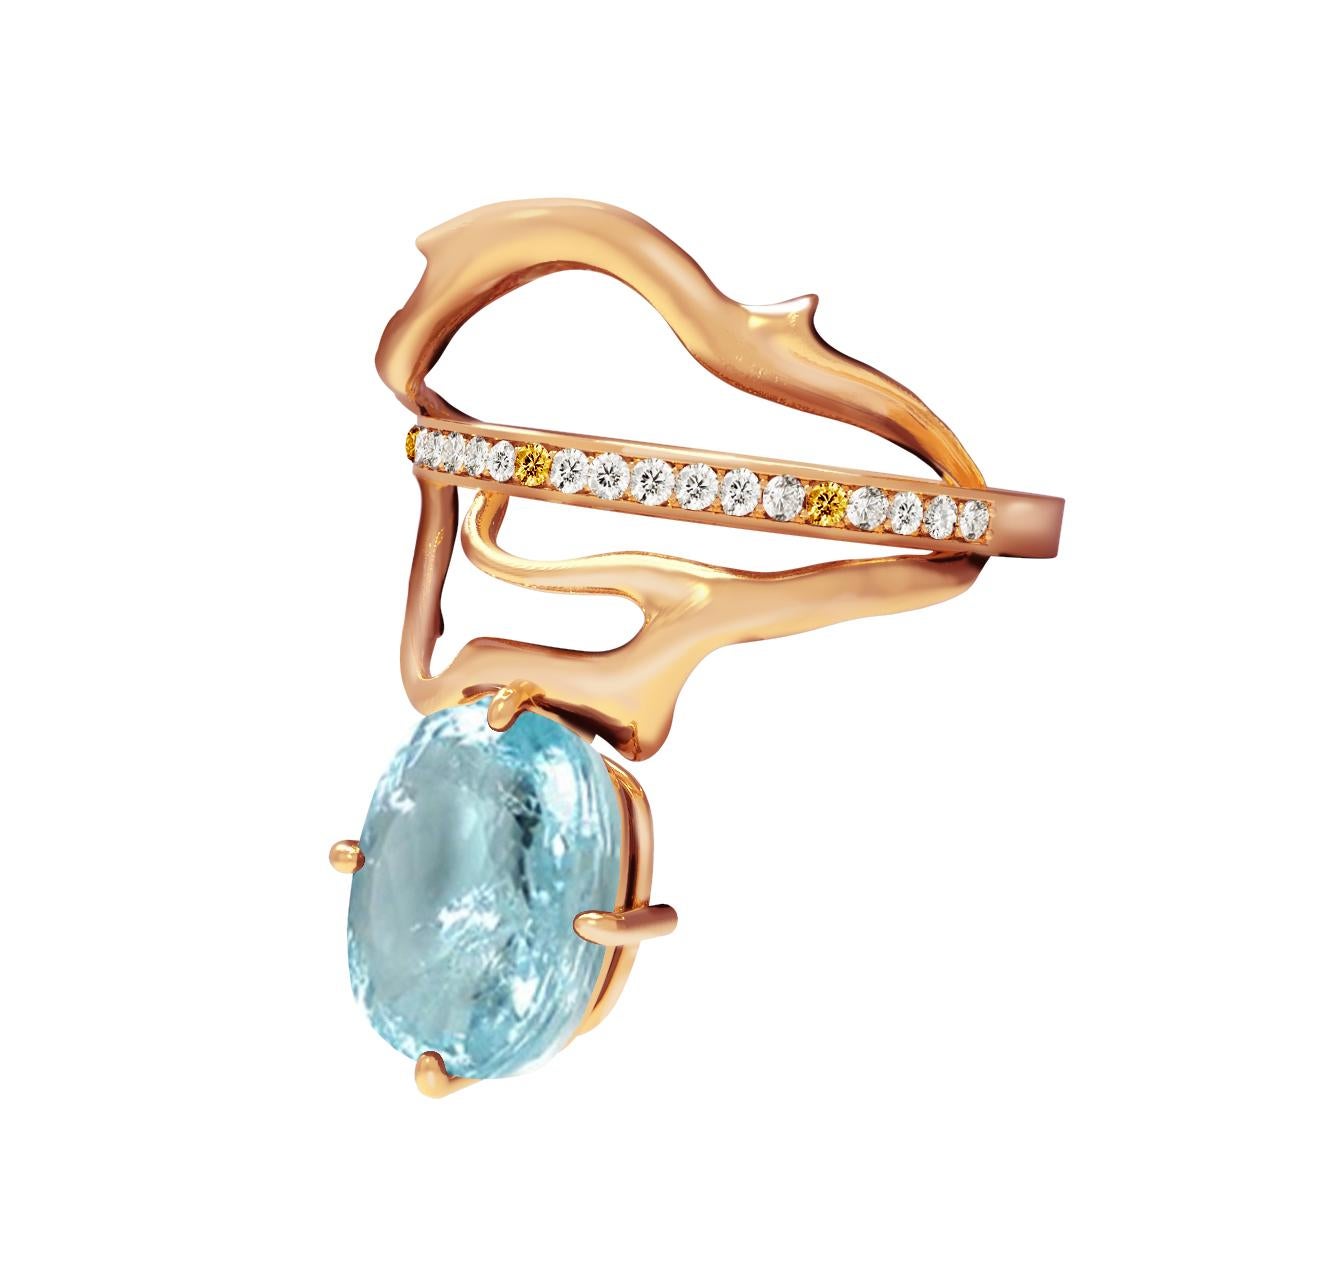 This Tibetan 18 karat rose gold contemporary ring is encrusted with diamonds, yellow sapphires, and oval cut paraiba tourmaline  (neon copper bearing, 2,4 carats, blue with inclusions). Size is custom made. Can be ordered with different gems.
It was